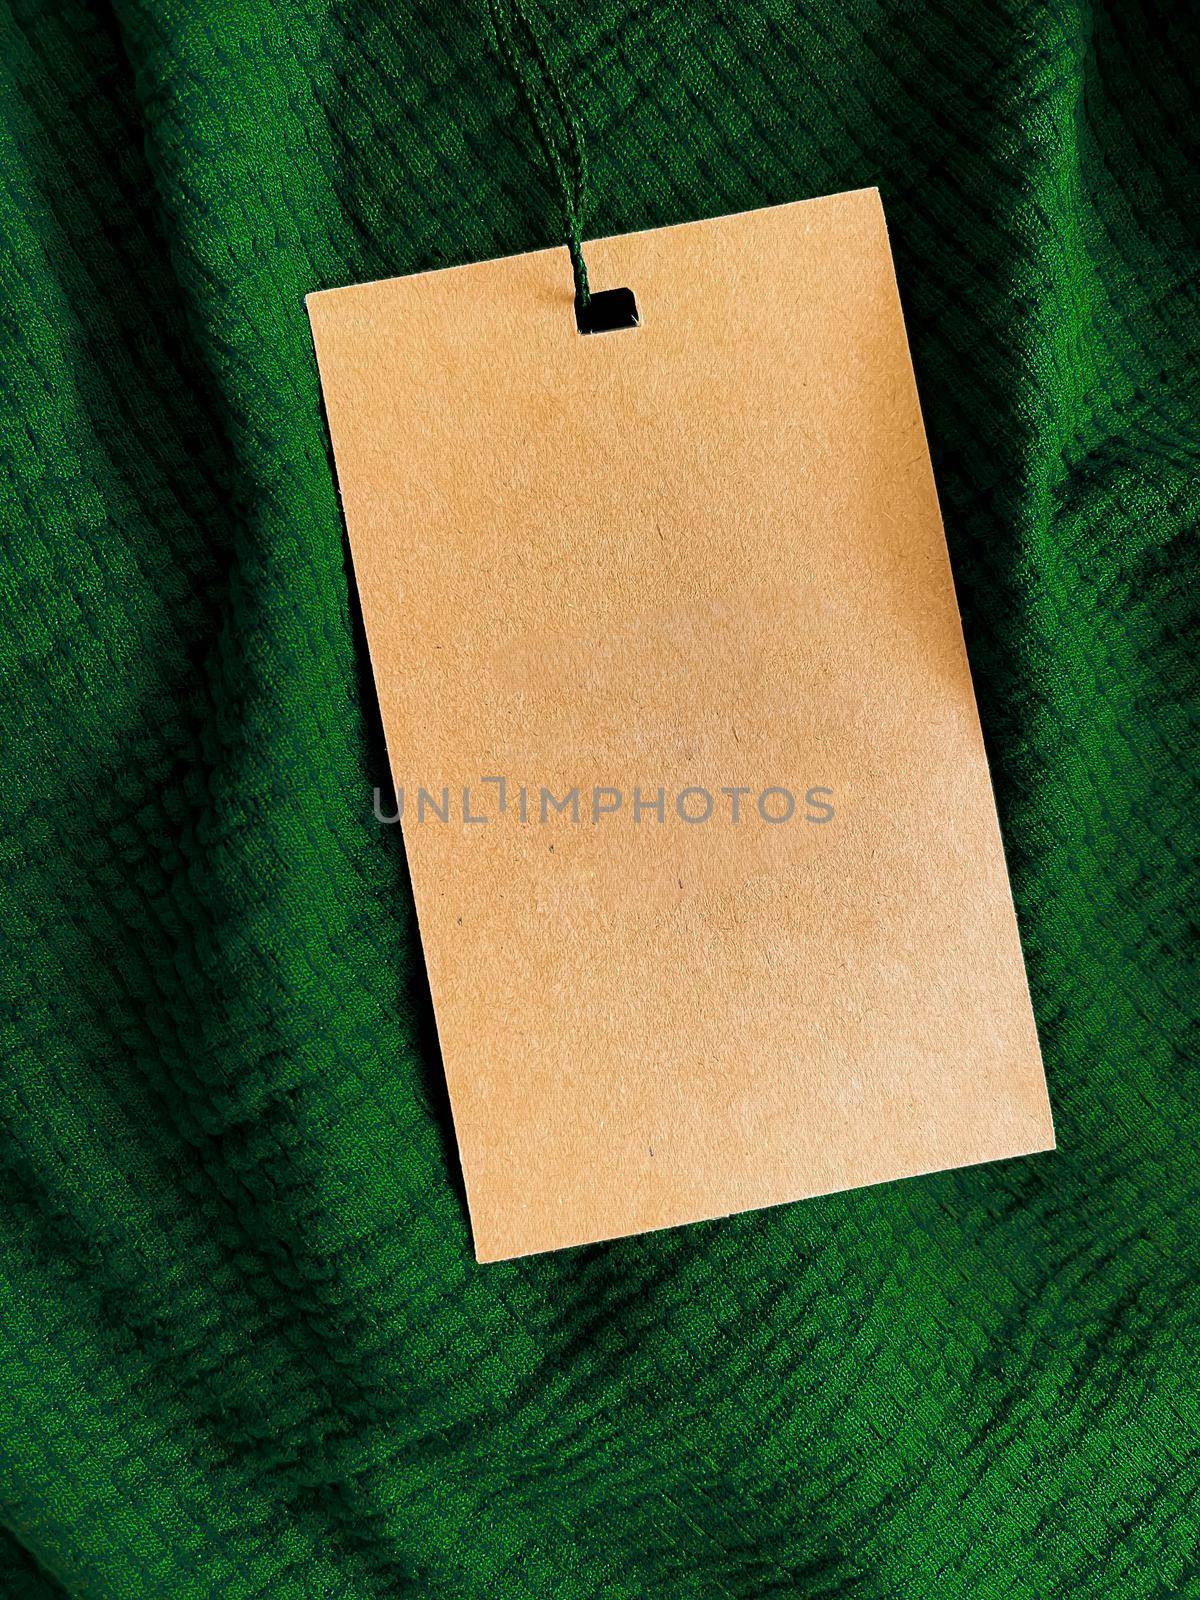 Blank fashion label tag, sale price card on luxury fabric background, shopping and retail concept